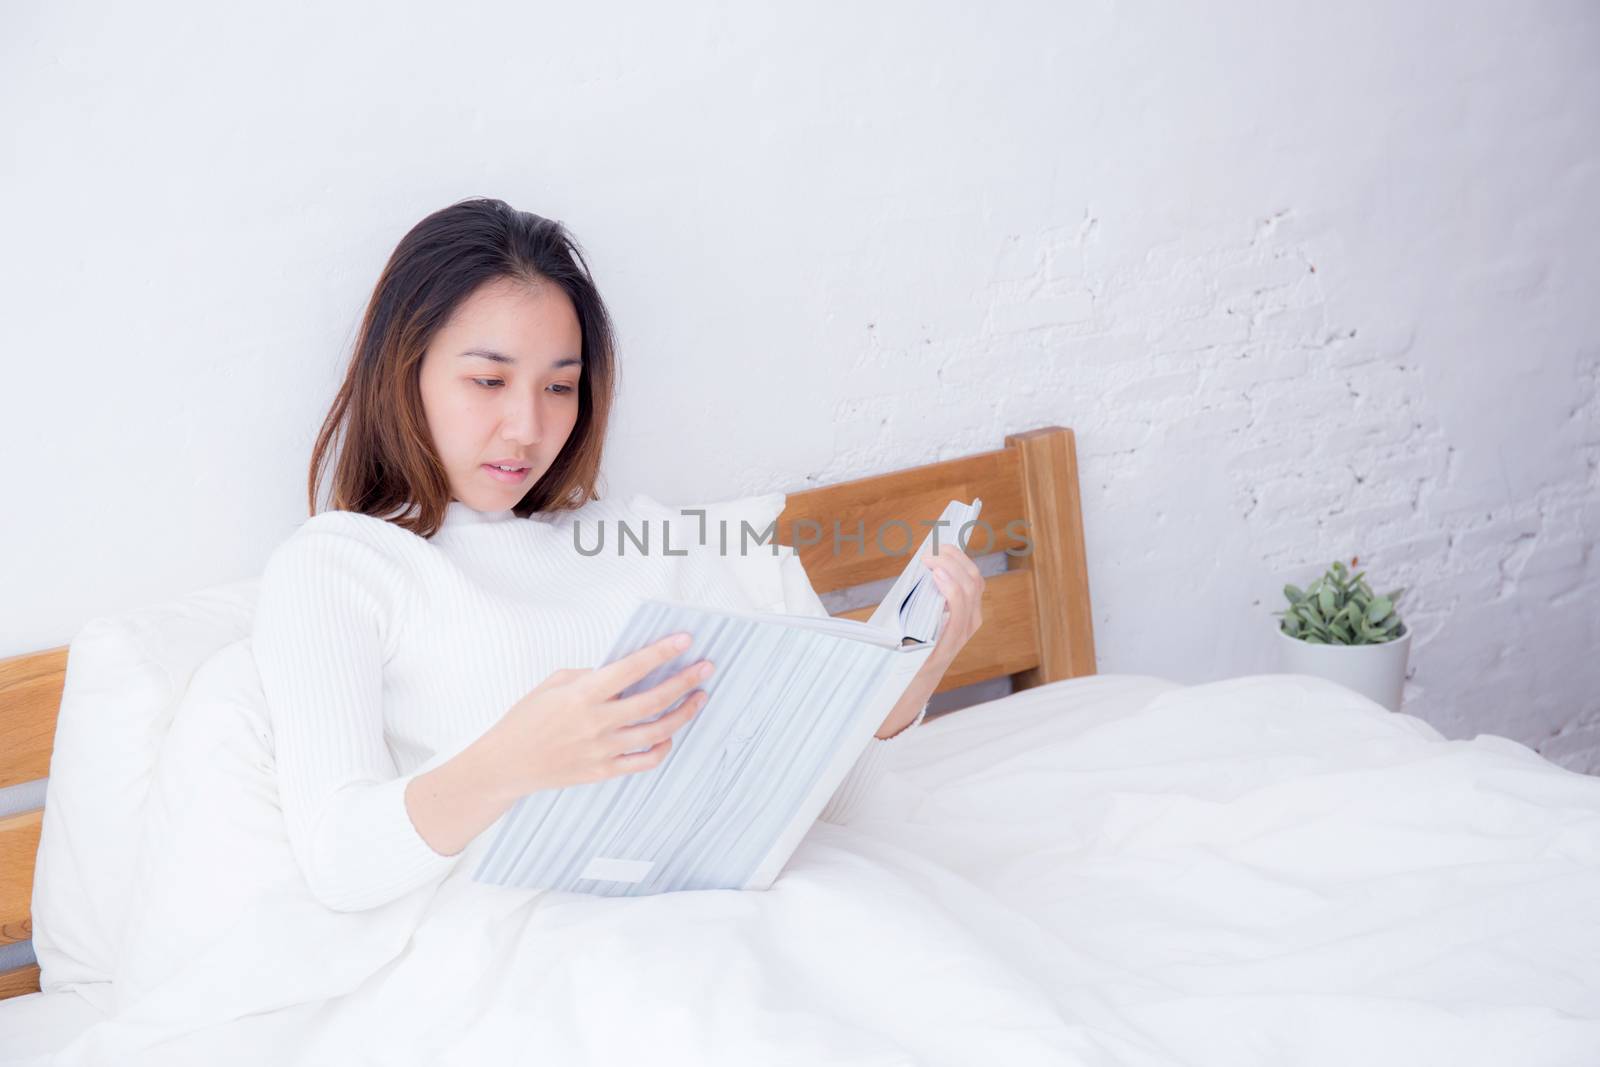 Asian woman reading a book and smiling in bedroom. lifestyle concept.